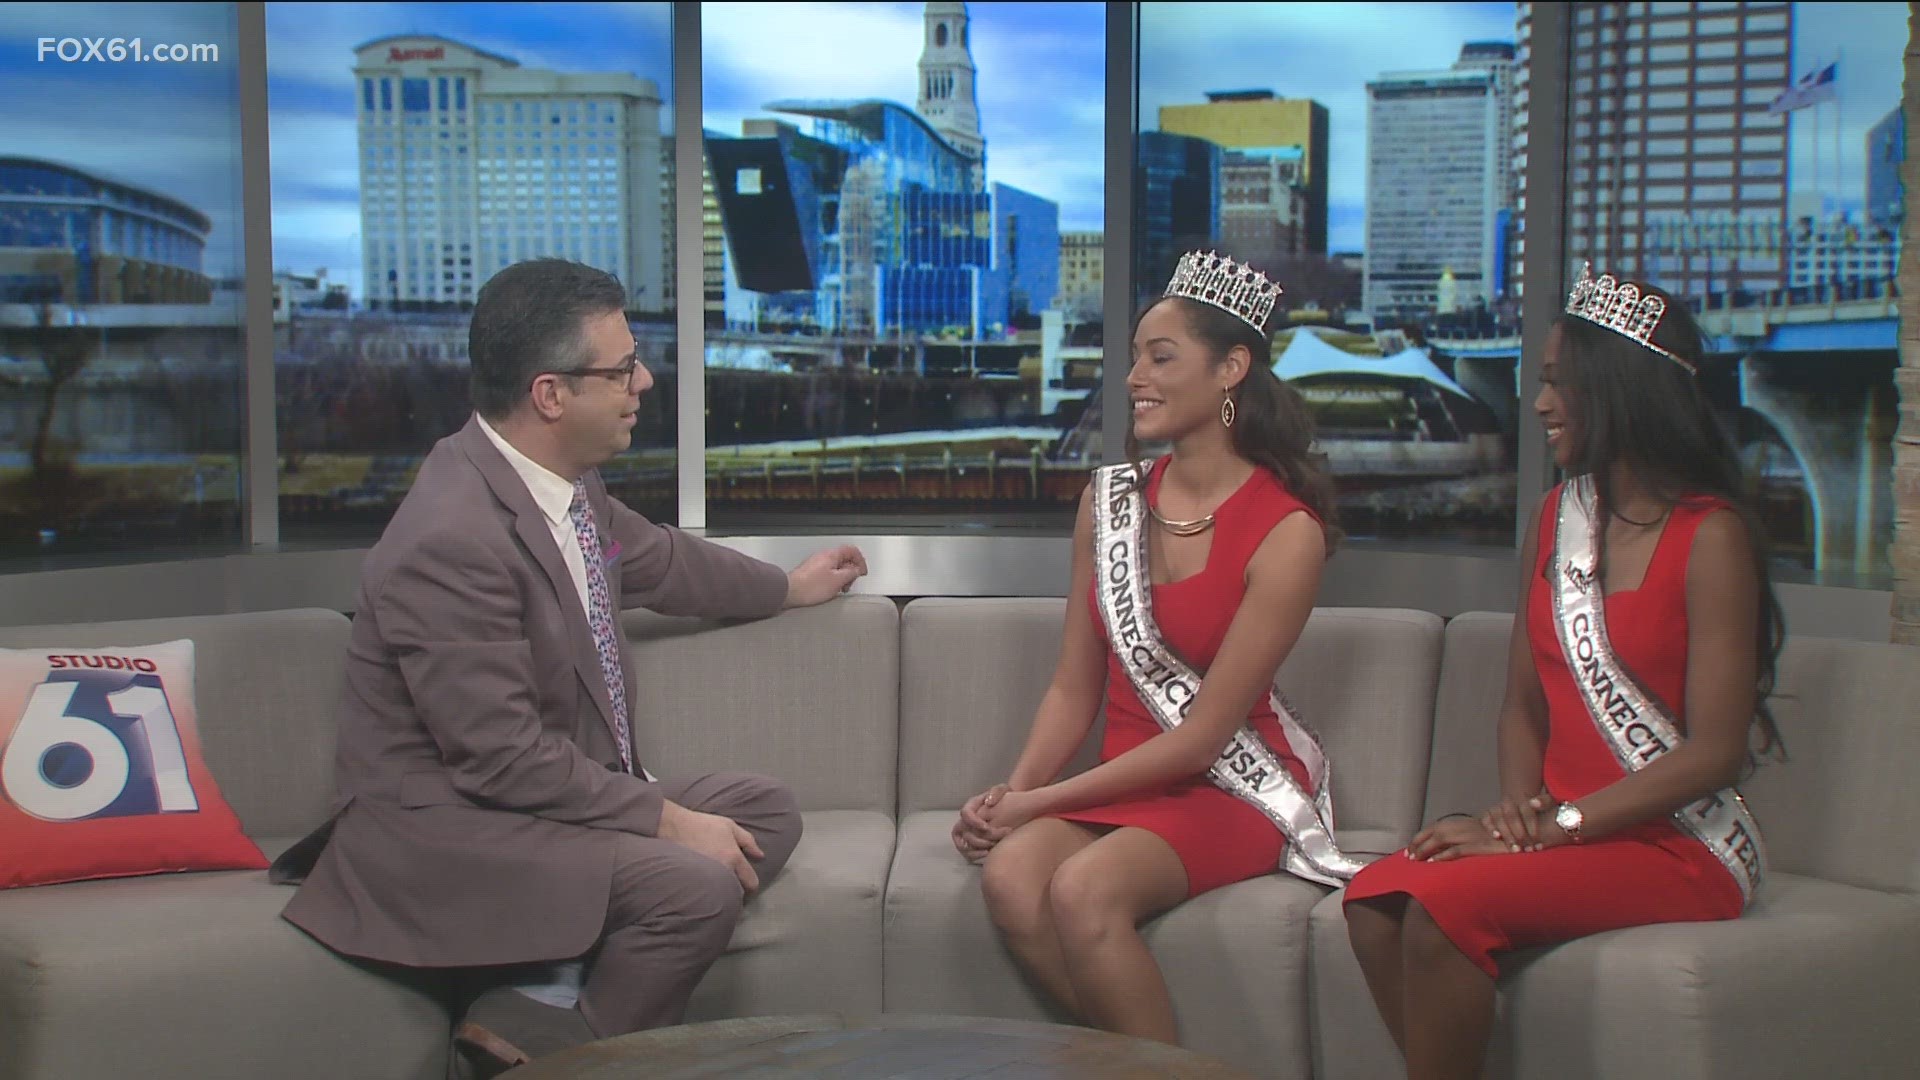 Miss Connecticut USA Karla Aponte Roque and Miss Connecticut Teen USA Jade Ferdinand visit FOX61 to share their experience.